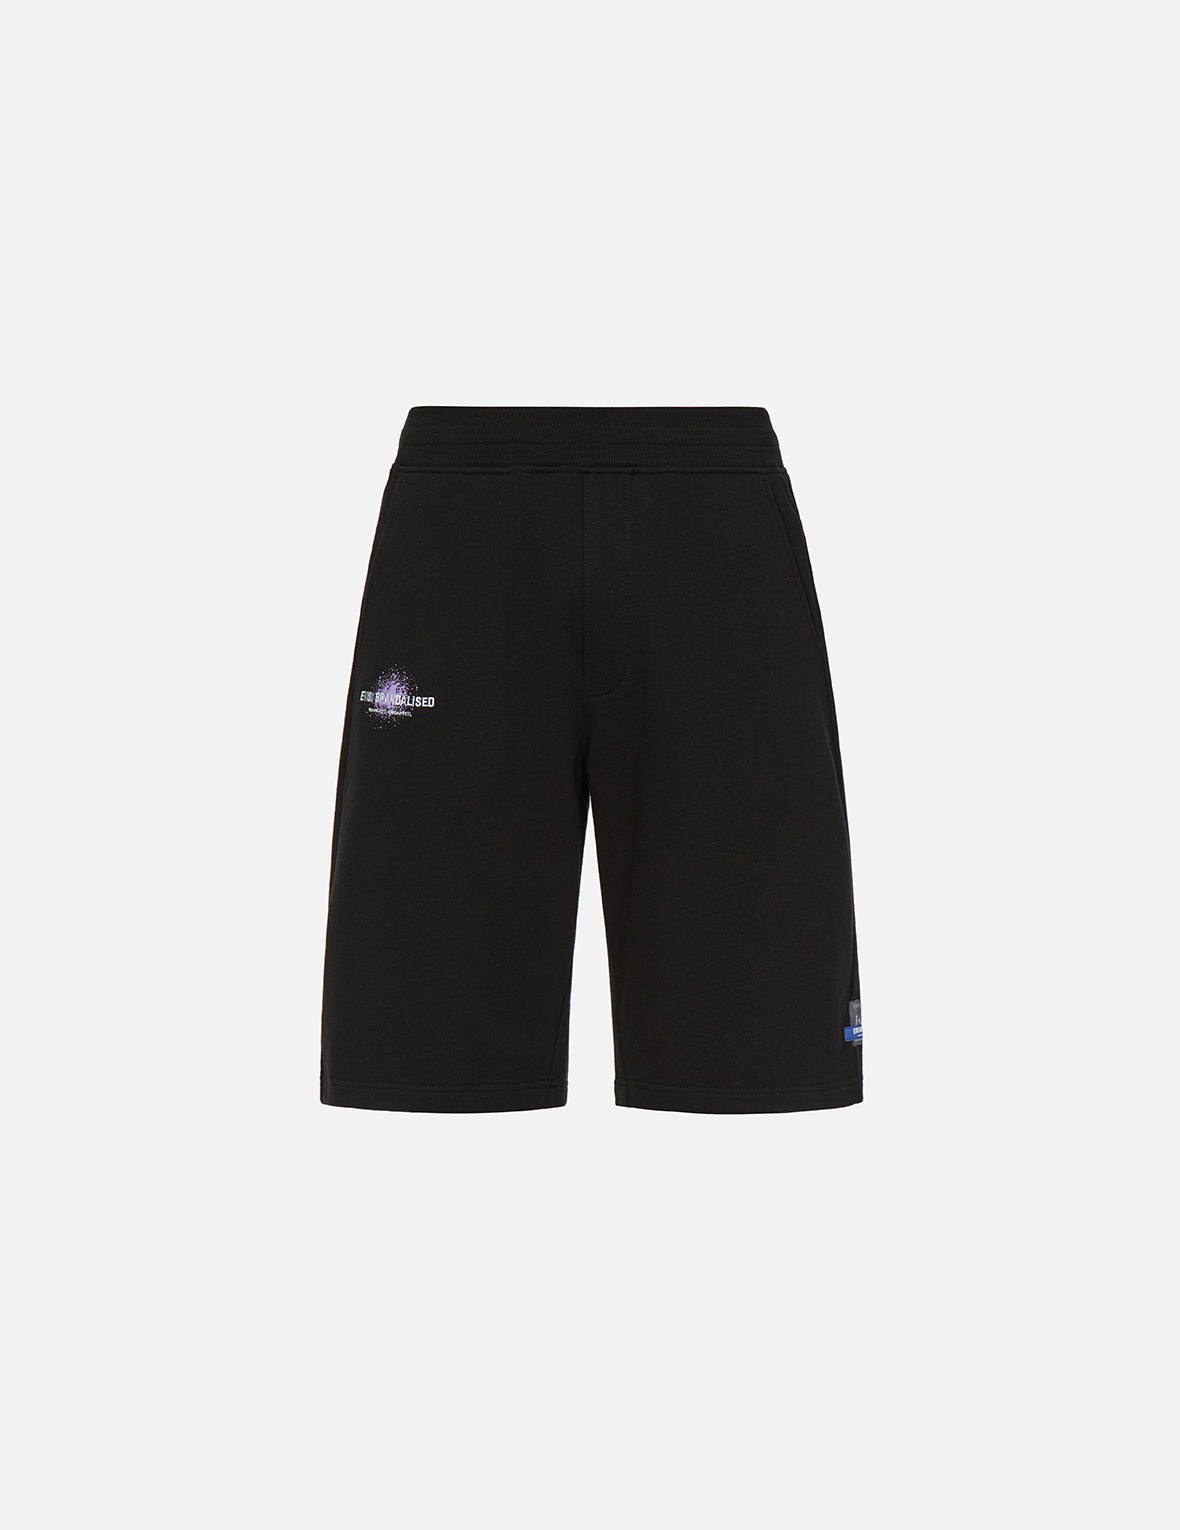 Evisu x Brandalised “Balloon Girl” and Daicock Sweat Shorts ( New Collection ) - Shop Streetwear, Sneakers, Slippers and Gifts online | Malaysia - The Factory KL